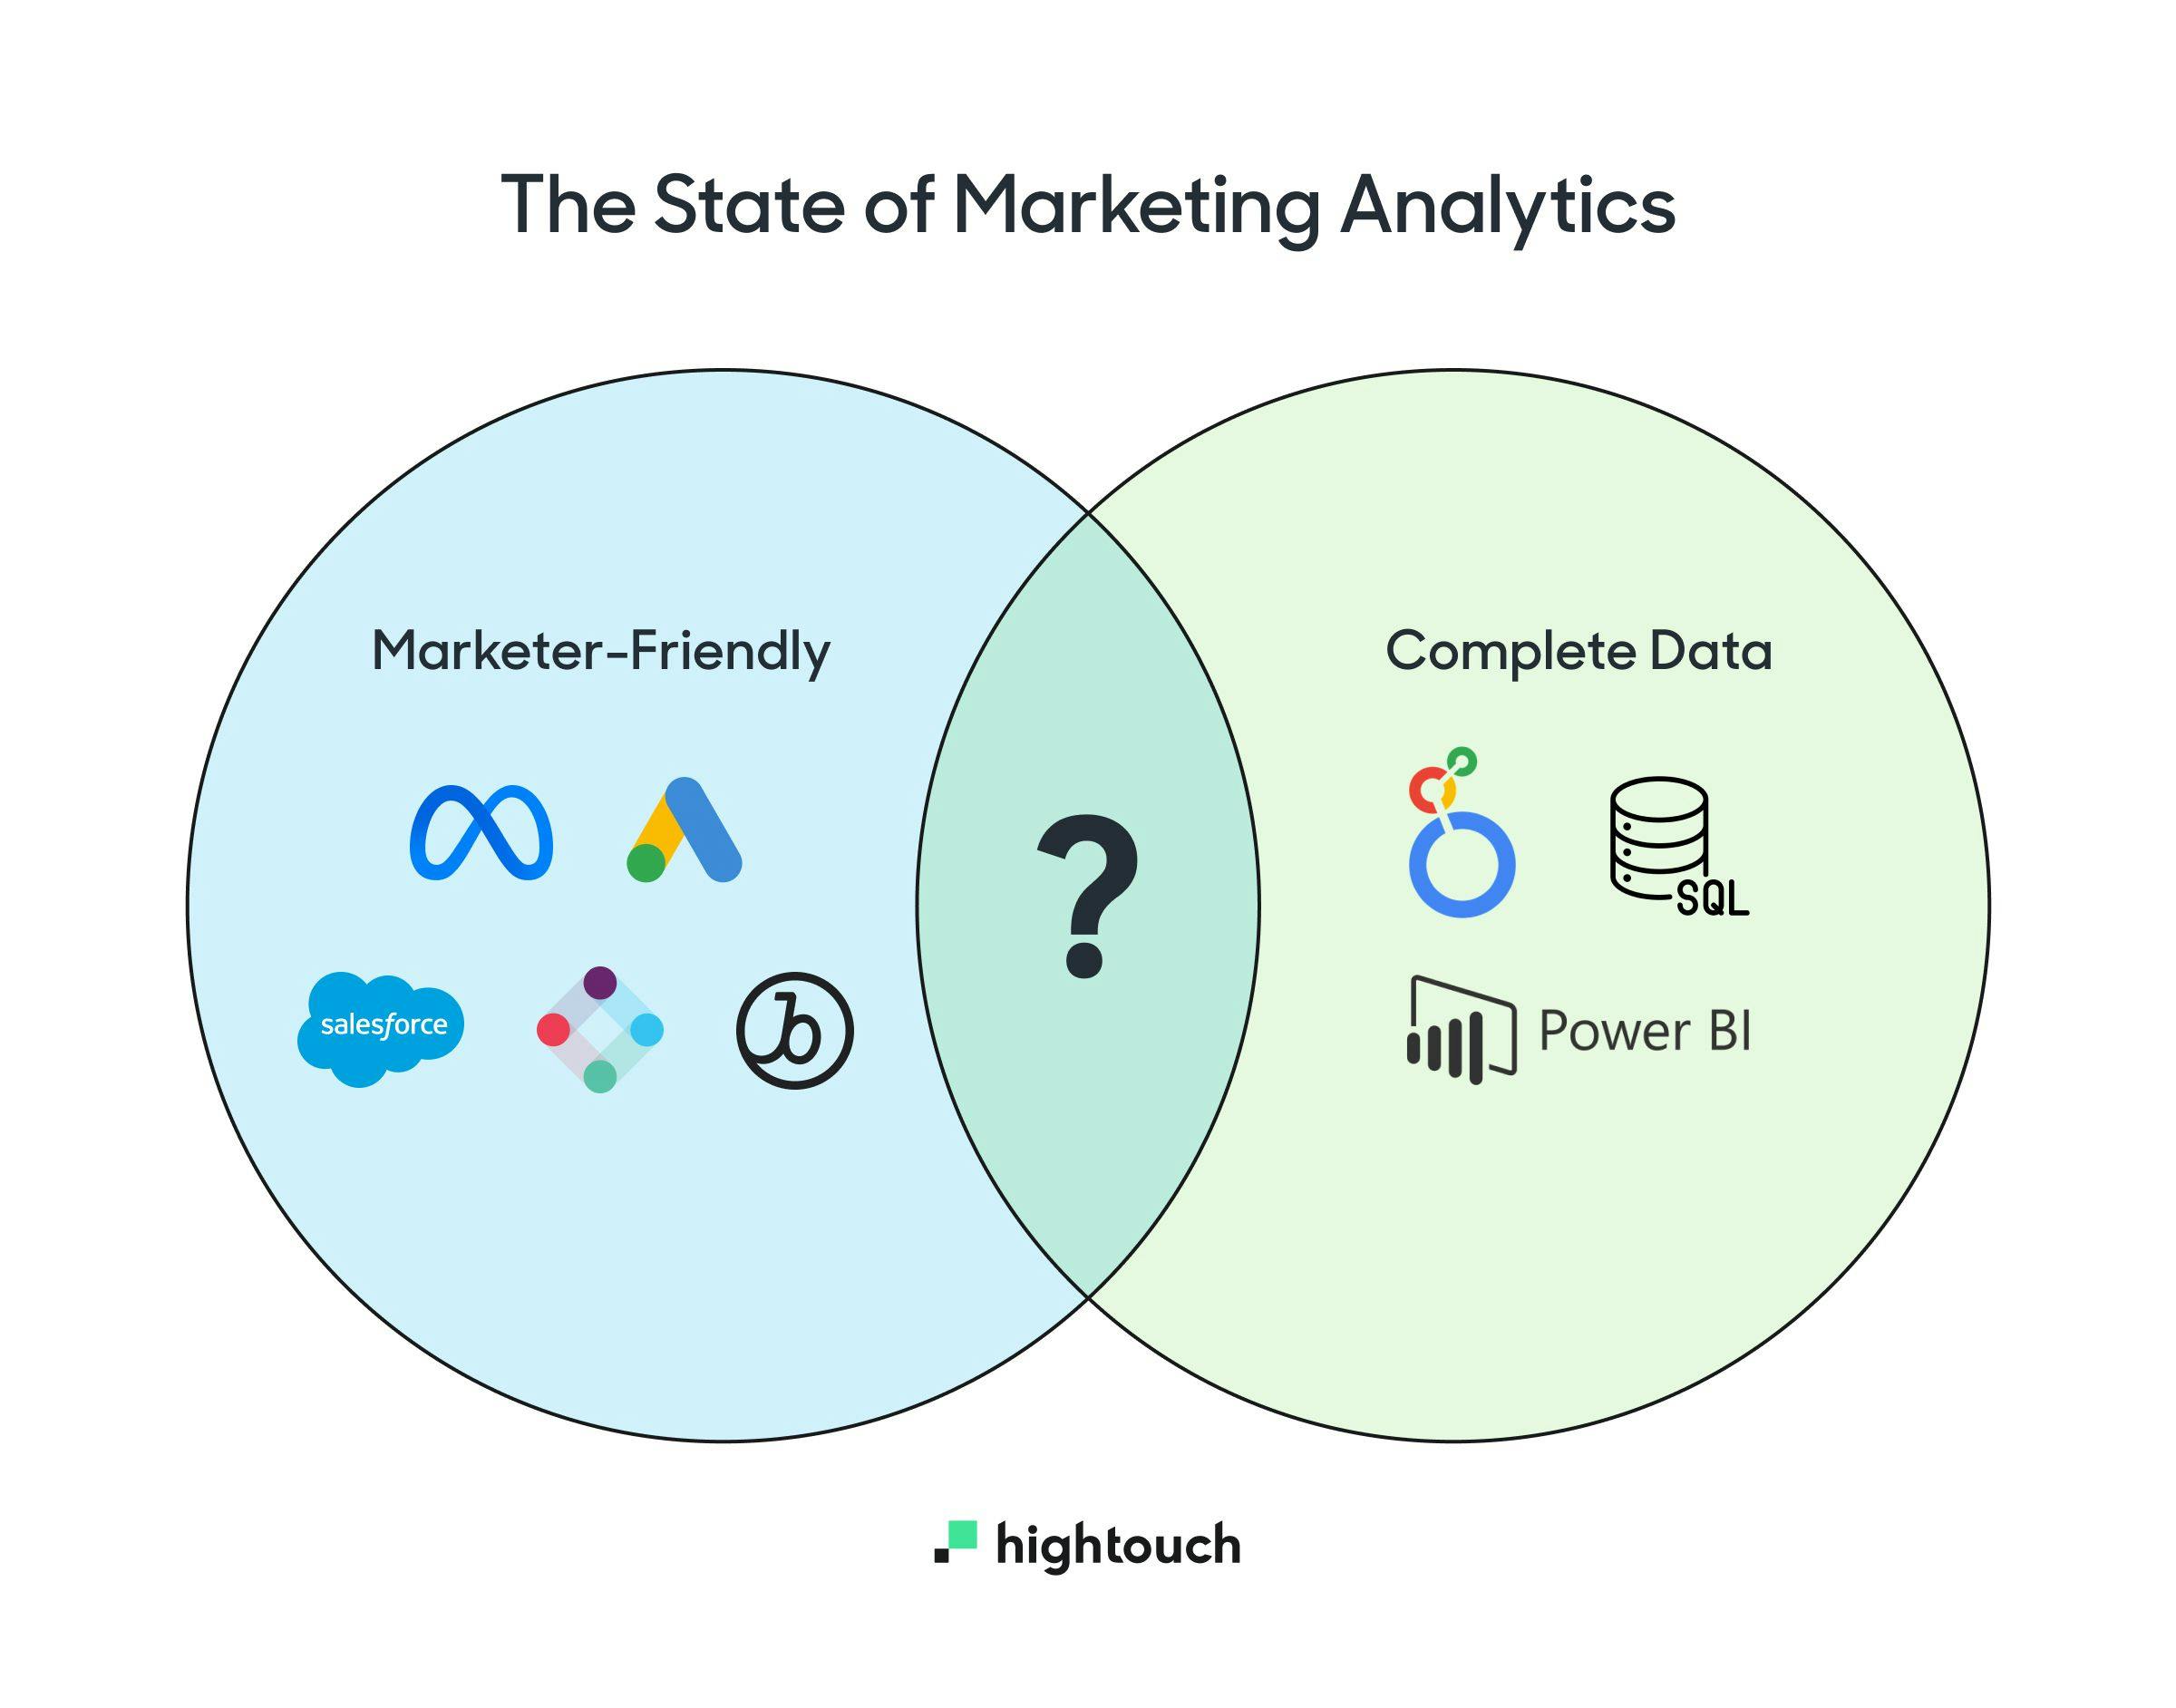 Marketing tools don't have complete data, and BI tools aren't marketer-friendly